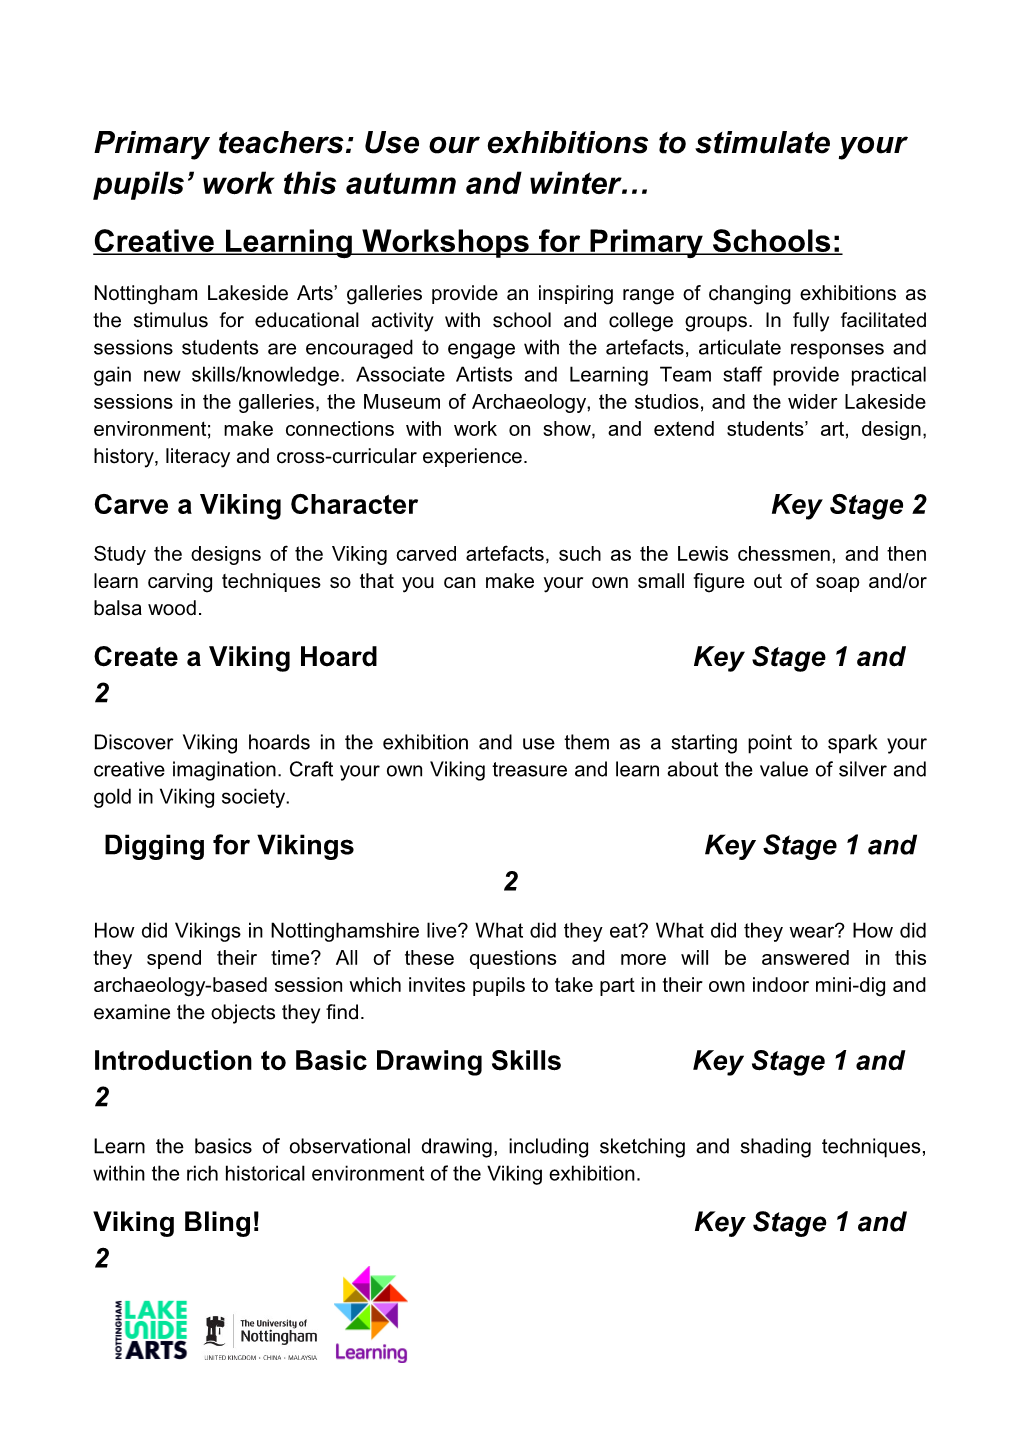 Creative Learning Workshops for Primary Schools